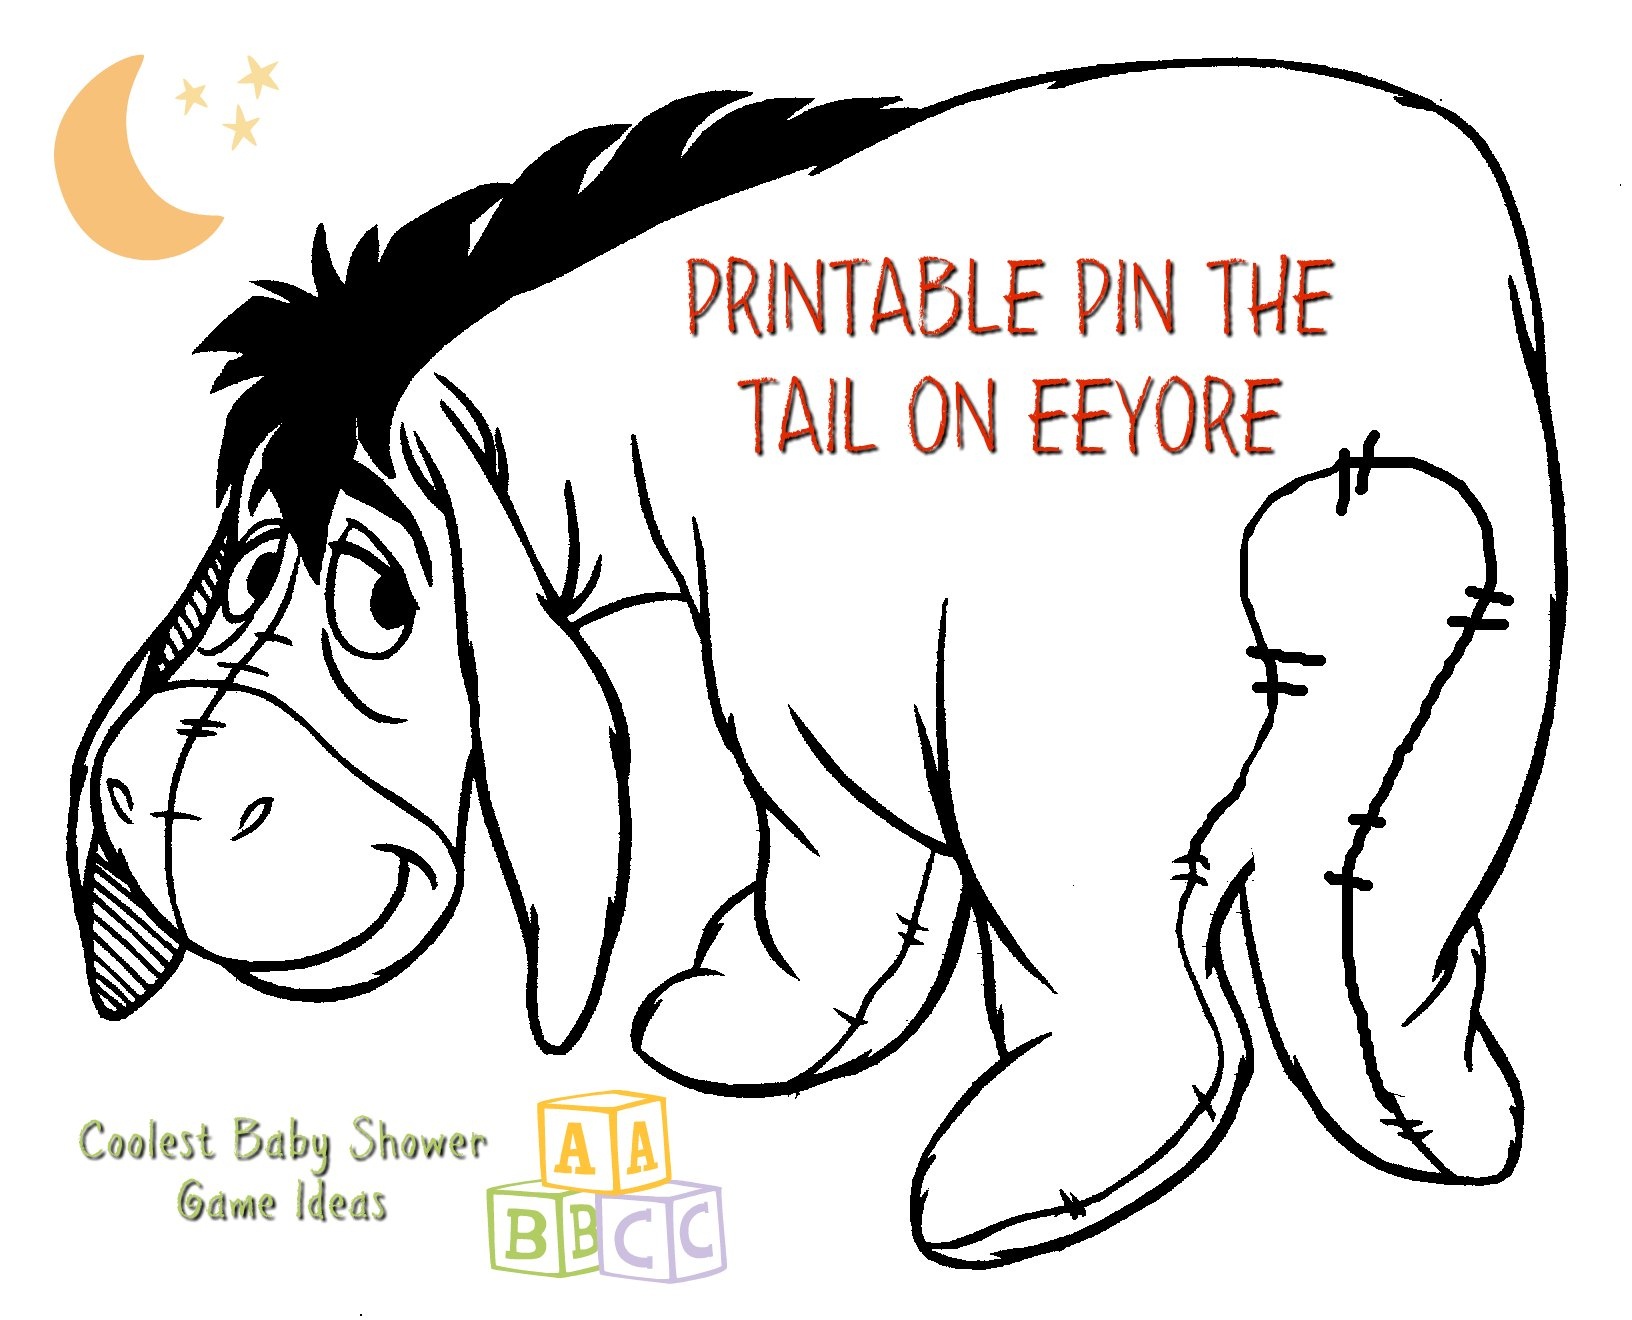 Coolest Winnie The Pooh Baby Shower Game Ideas - Pin The Tail On The Donkey Printable Free